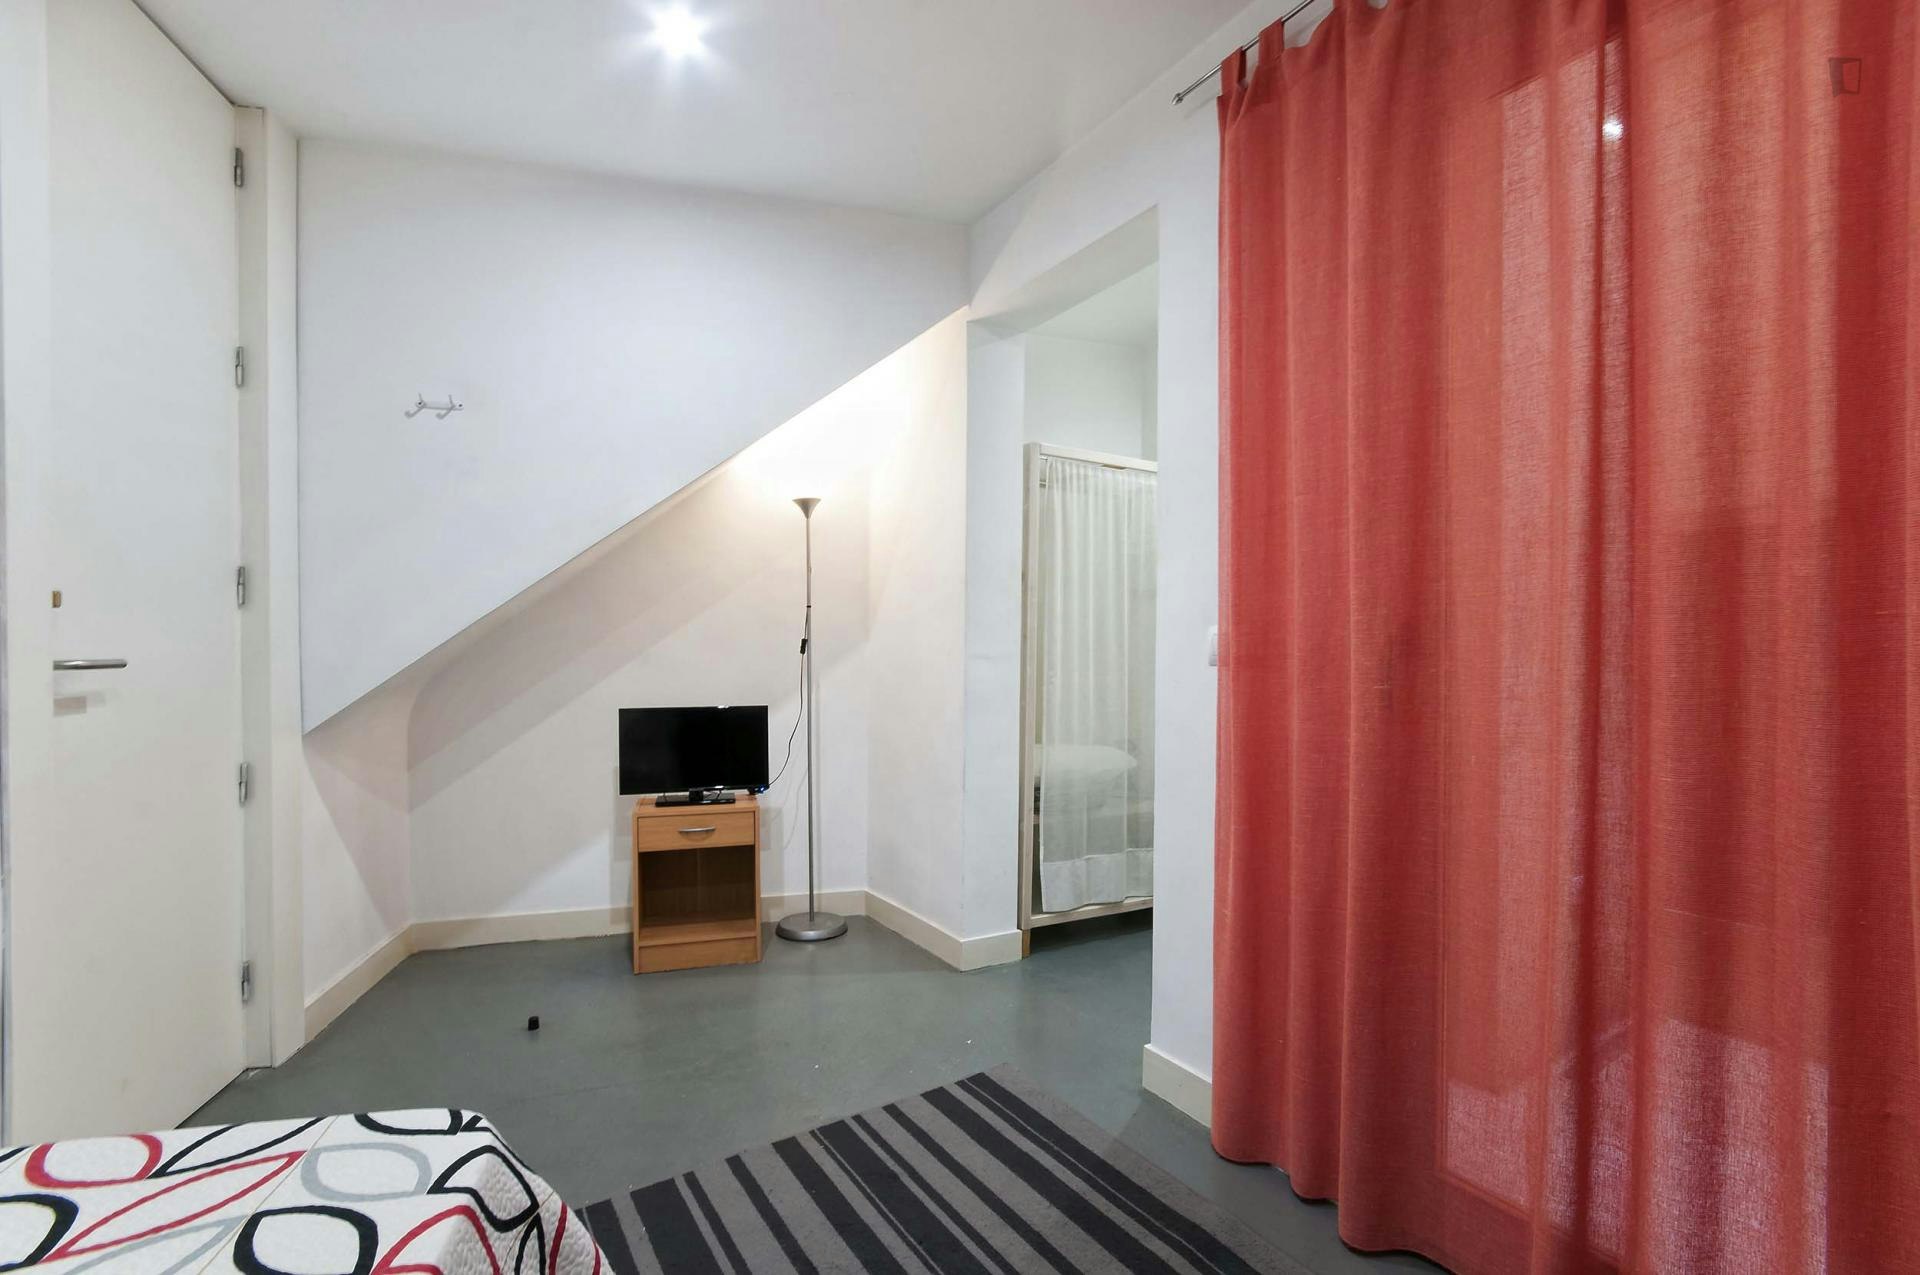 Lovely double bedroom close to Mercado train station